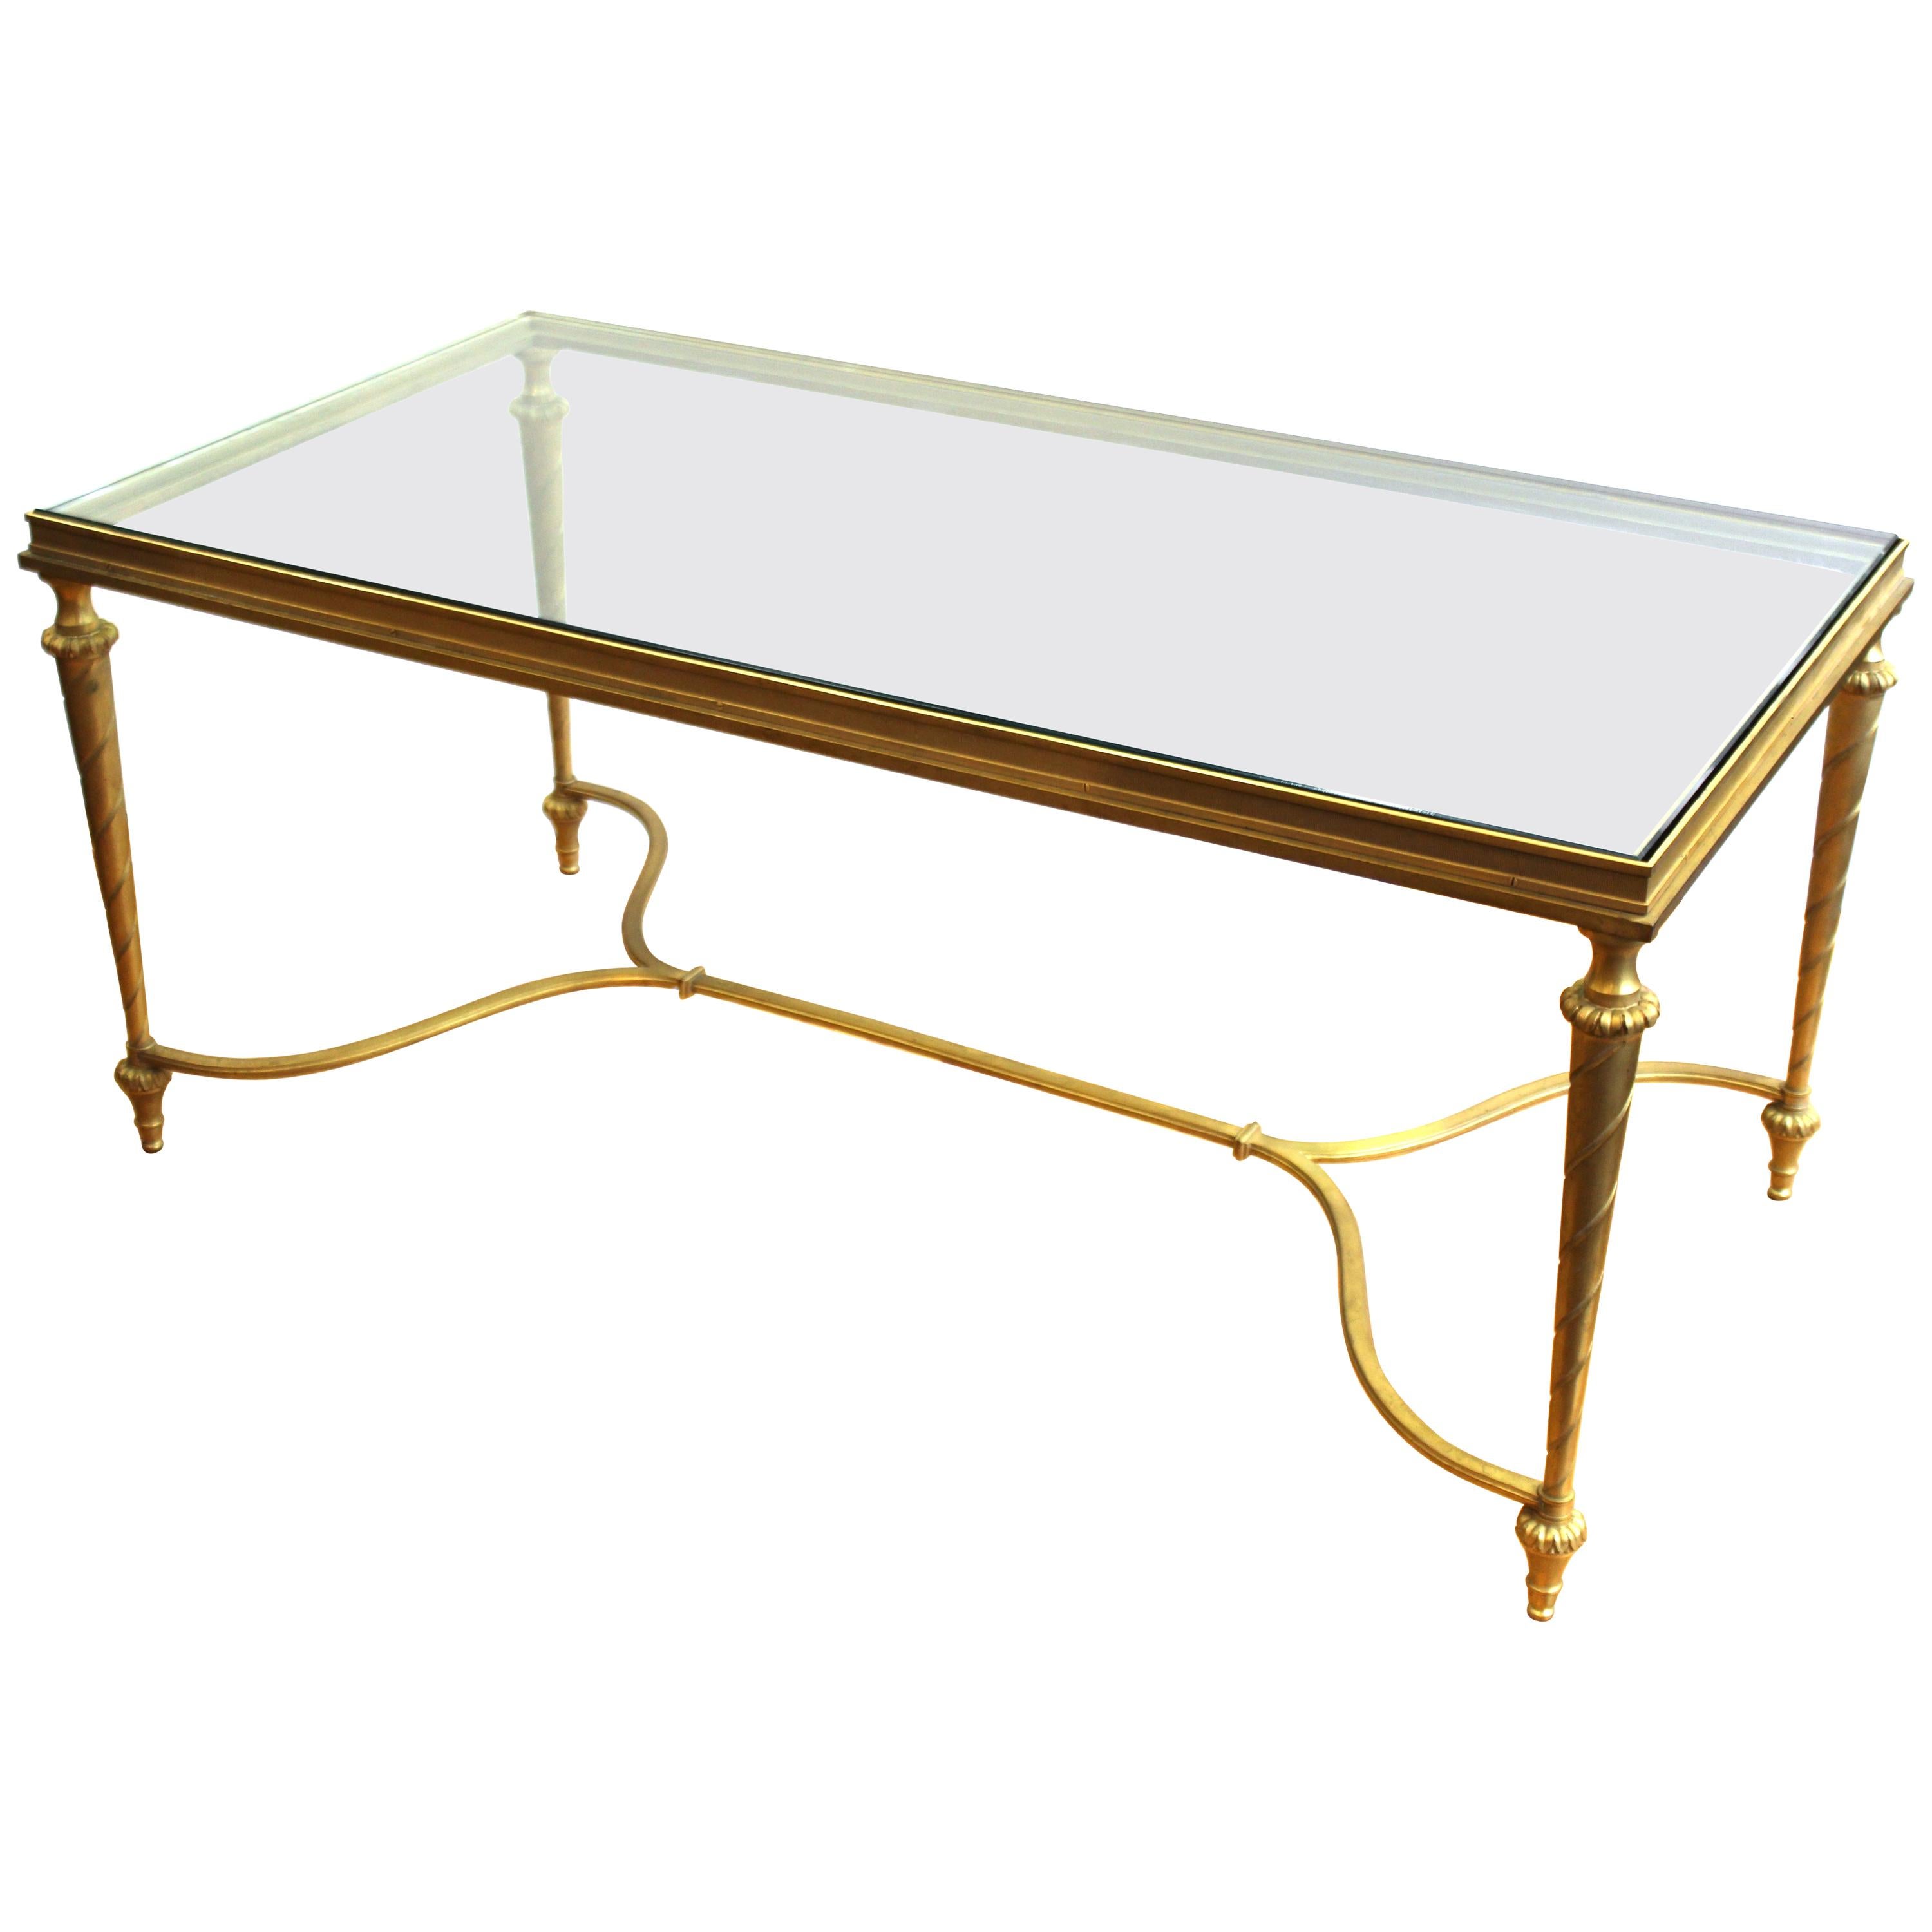 Hollywood Regency Gilt Metal Coffee Table with Glass Top